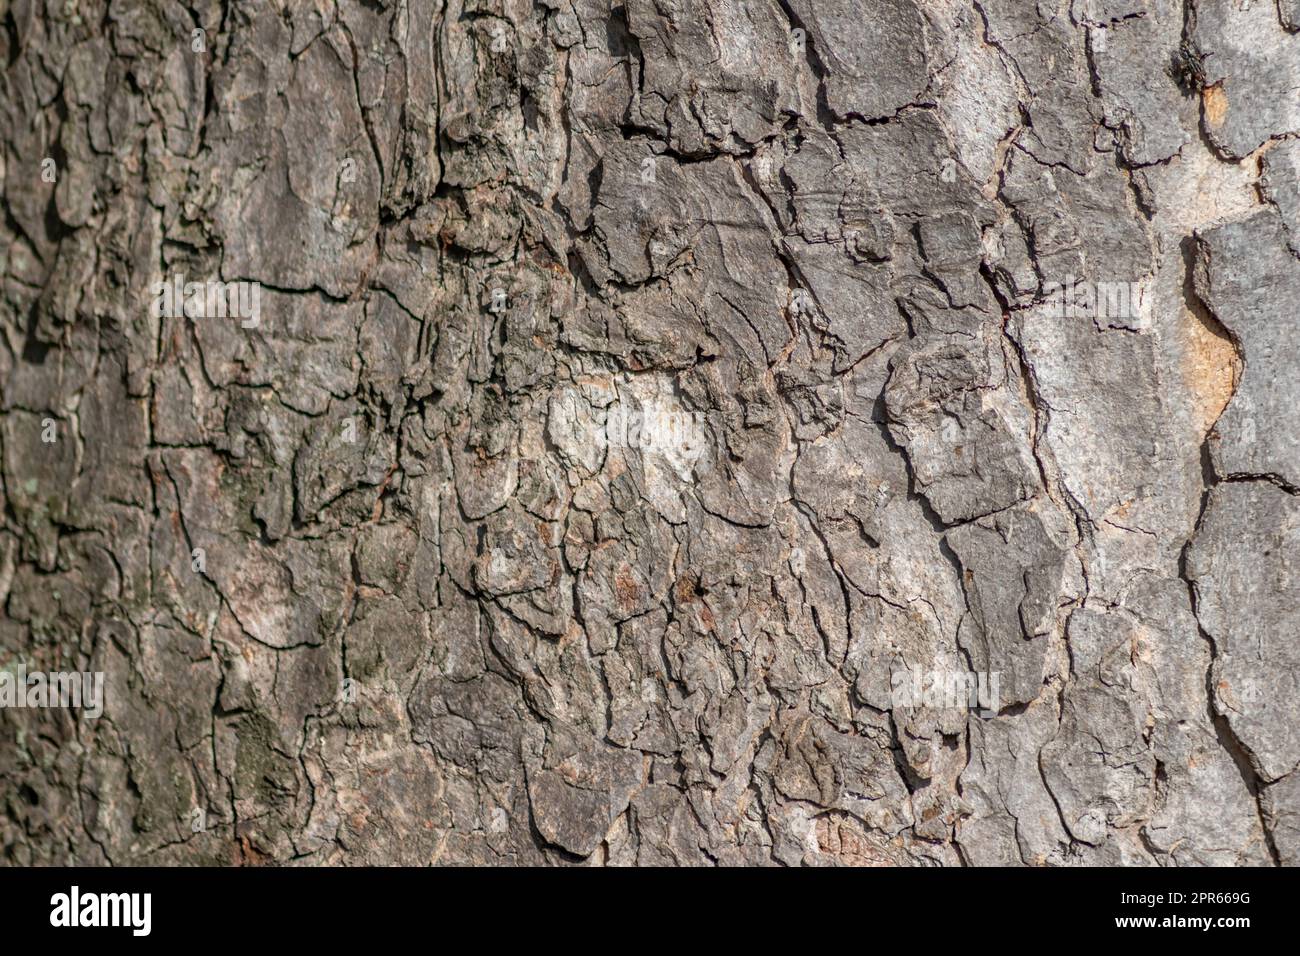 Tree bark macro with fine natural structures and rough tree bark as natural and ecological background shows a beautiful wooden structure with scars and protection as habitat for little insects Stock Photo